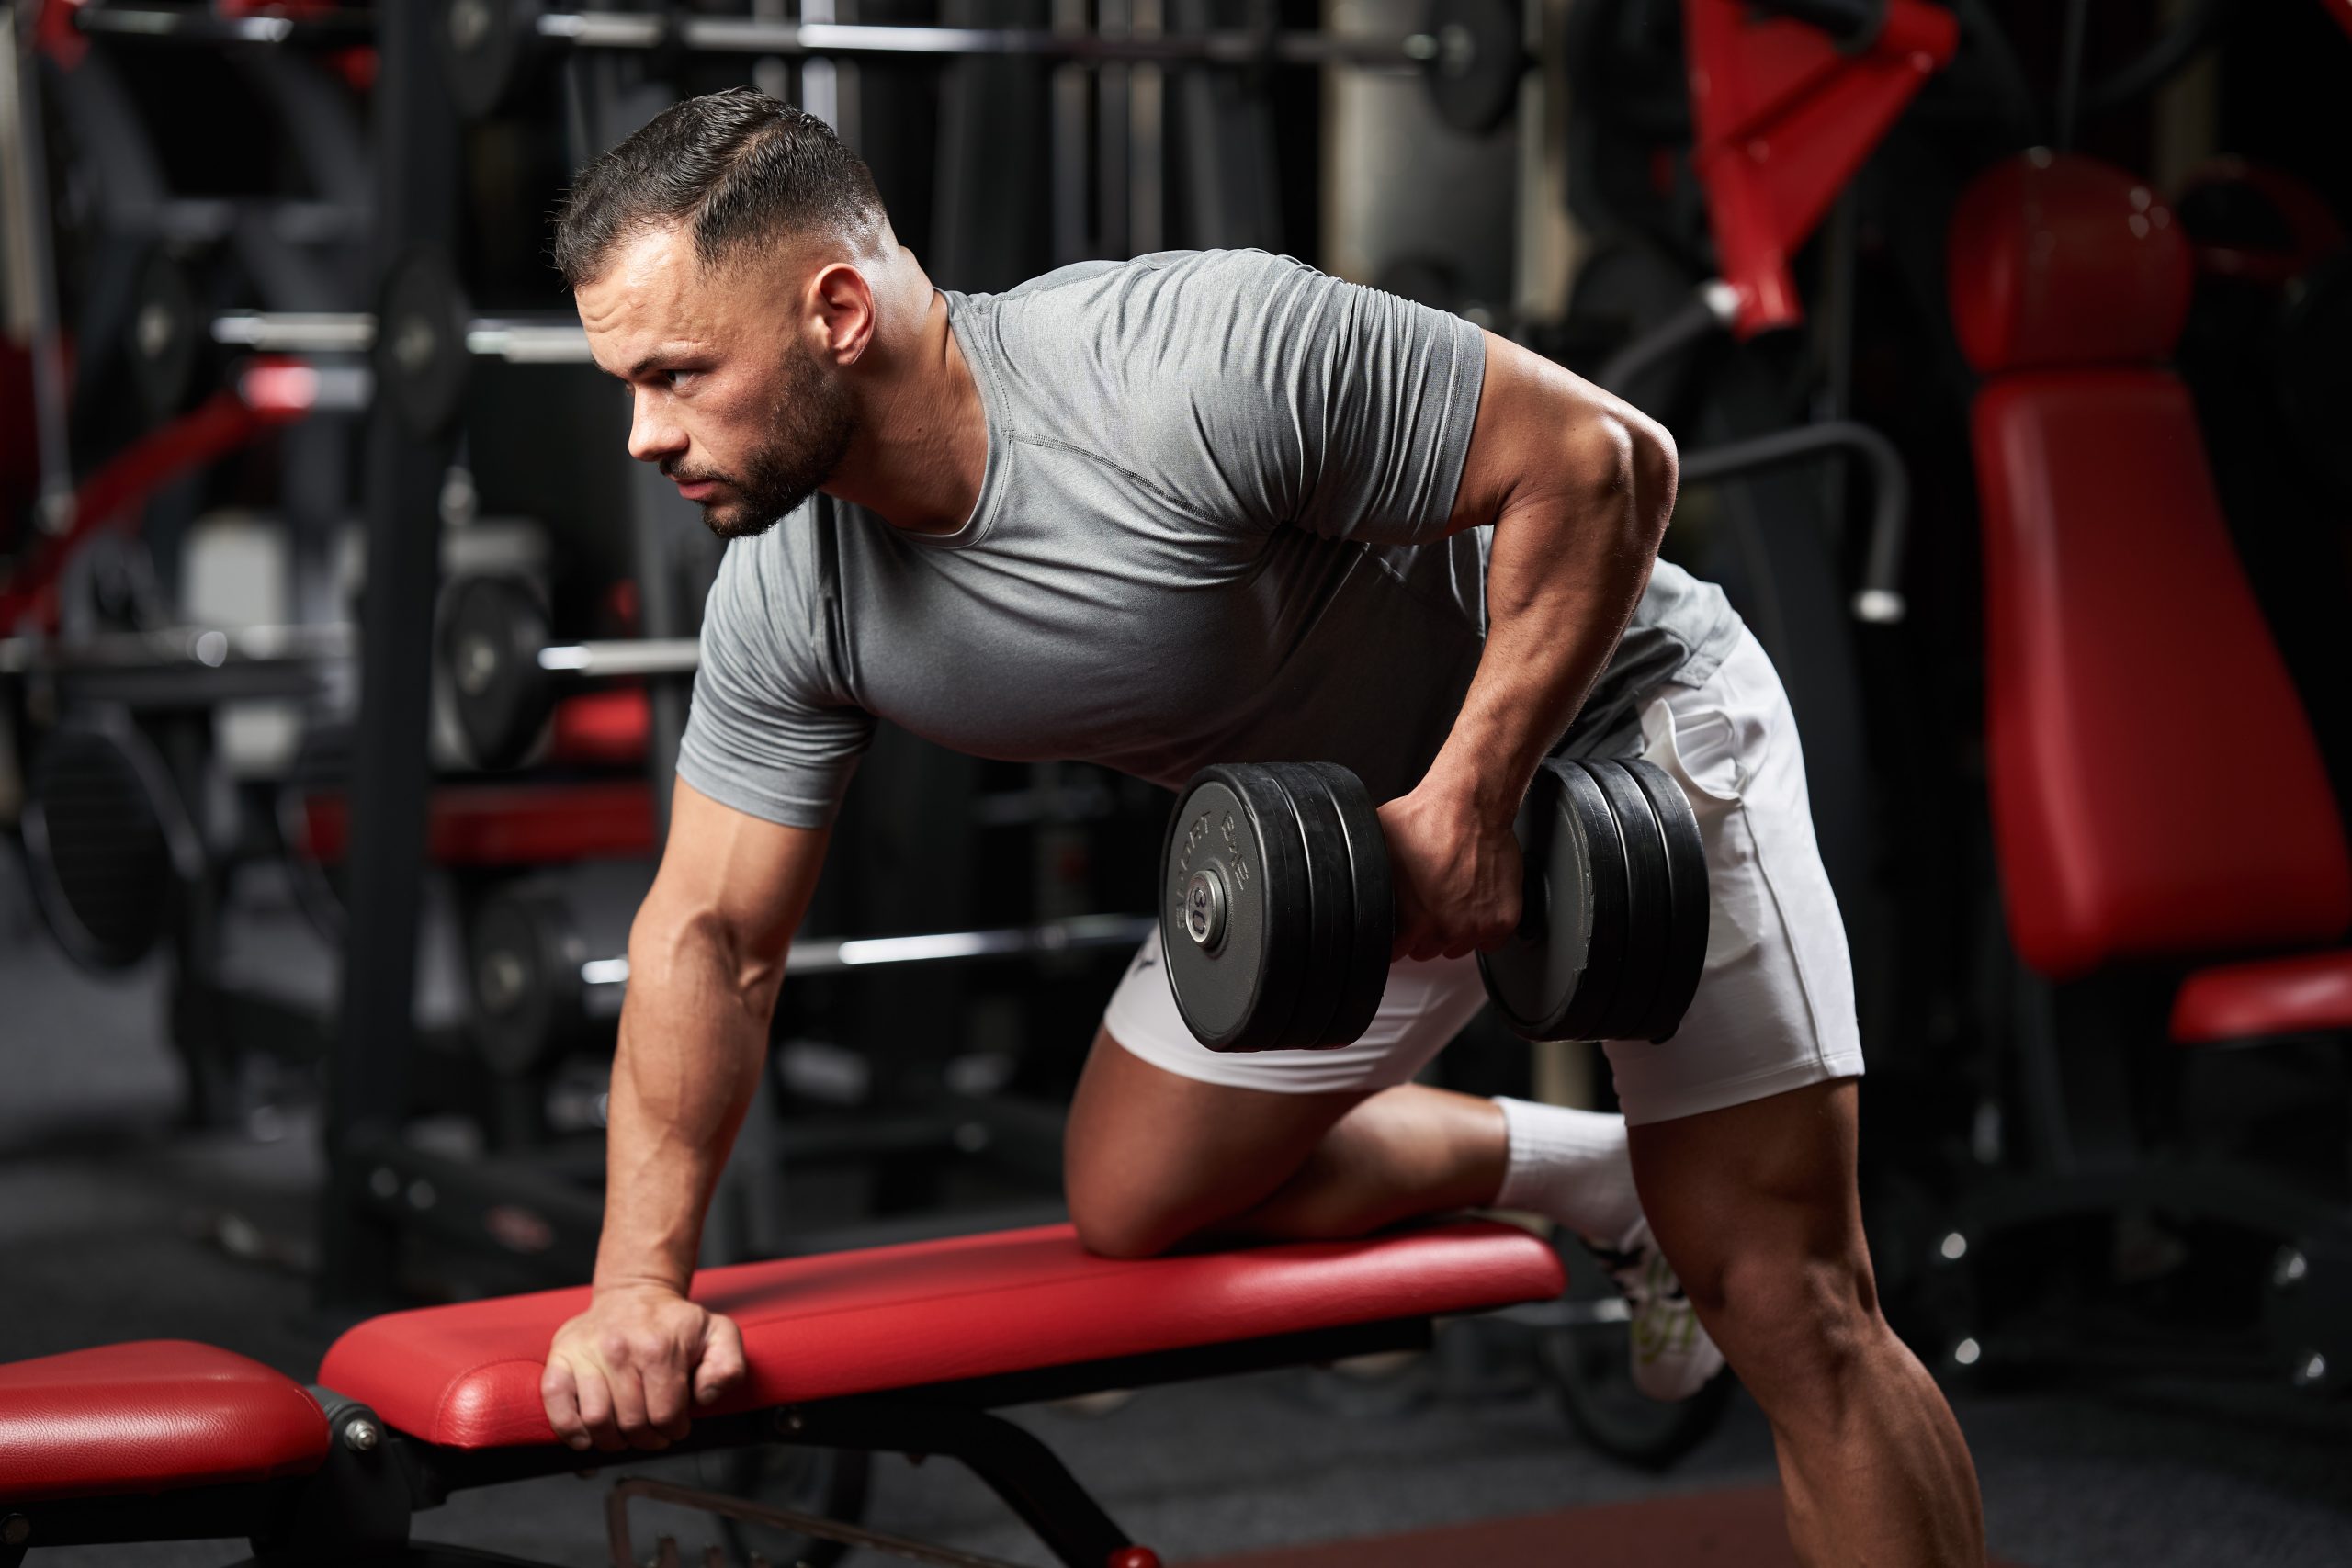 I'm a personal trainer — here are 3 best compound exercises for cutting  V-shaped back muscles